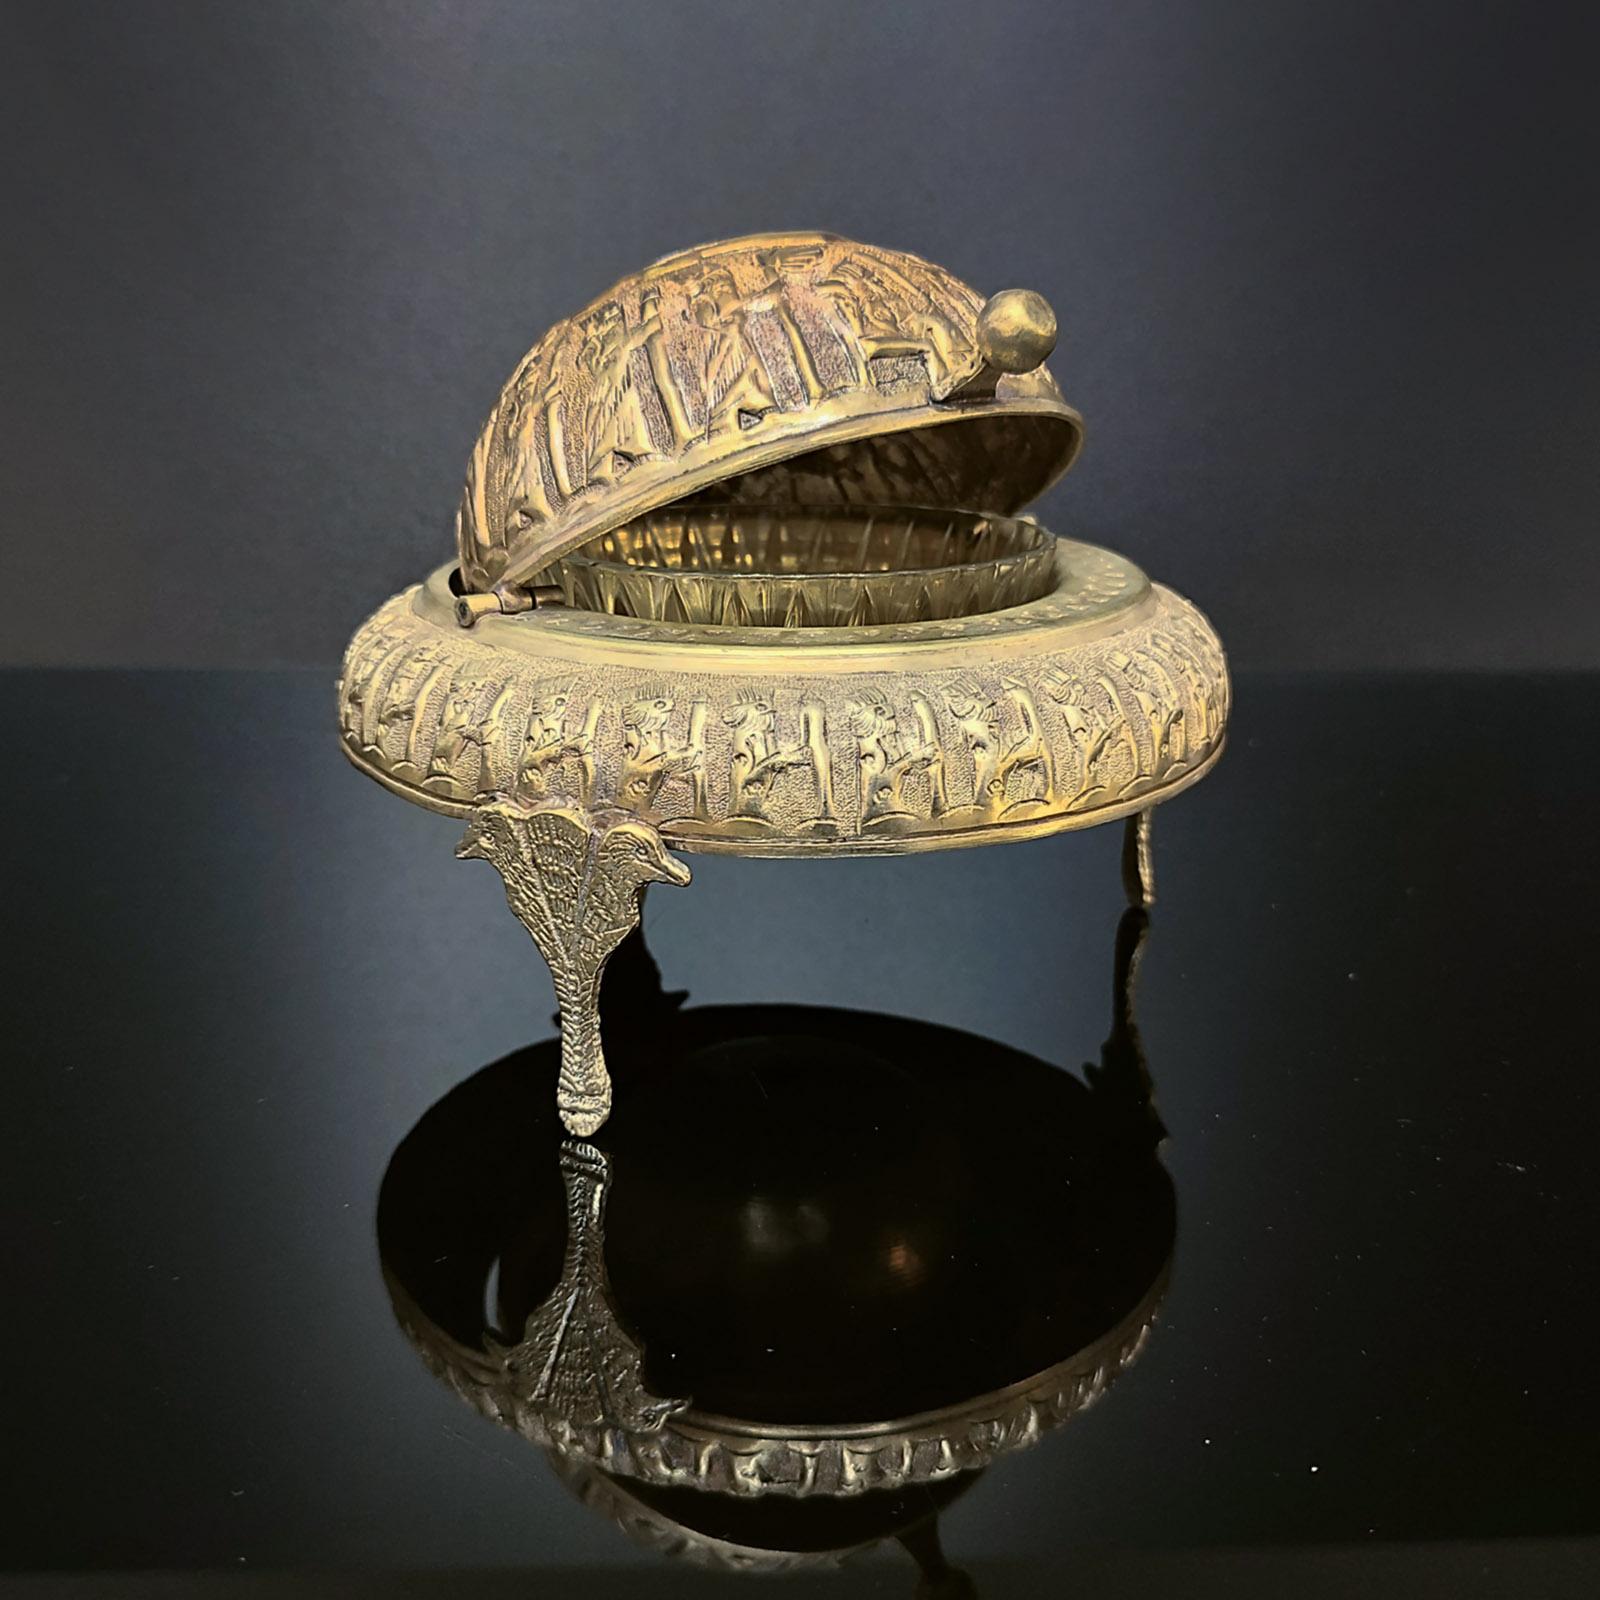 Handcrafted brass bowl, roll top round dome with rich Persian style design.
This footed presentation brass dish keeps inside a crystal bowl which makes it the perfect caviar server. Decorated with Persian scenes all around. Faded old silver plating